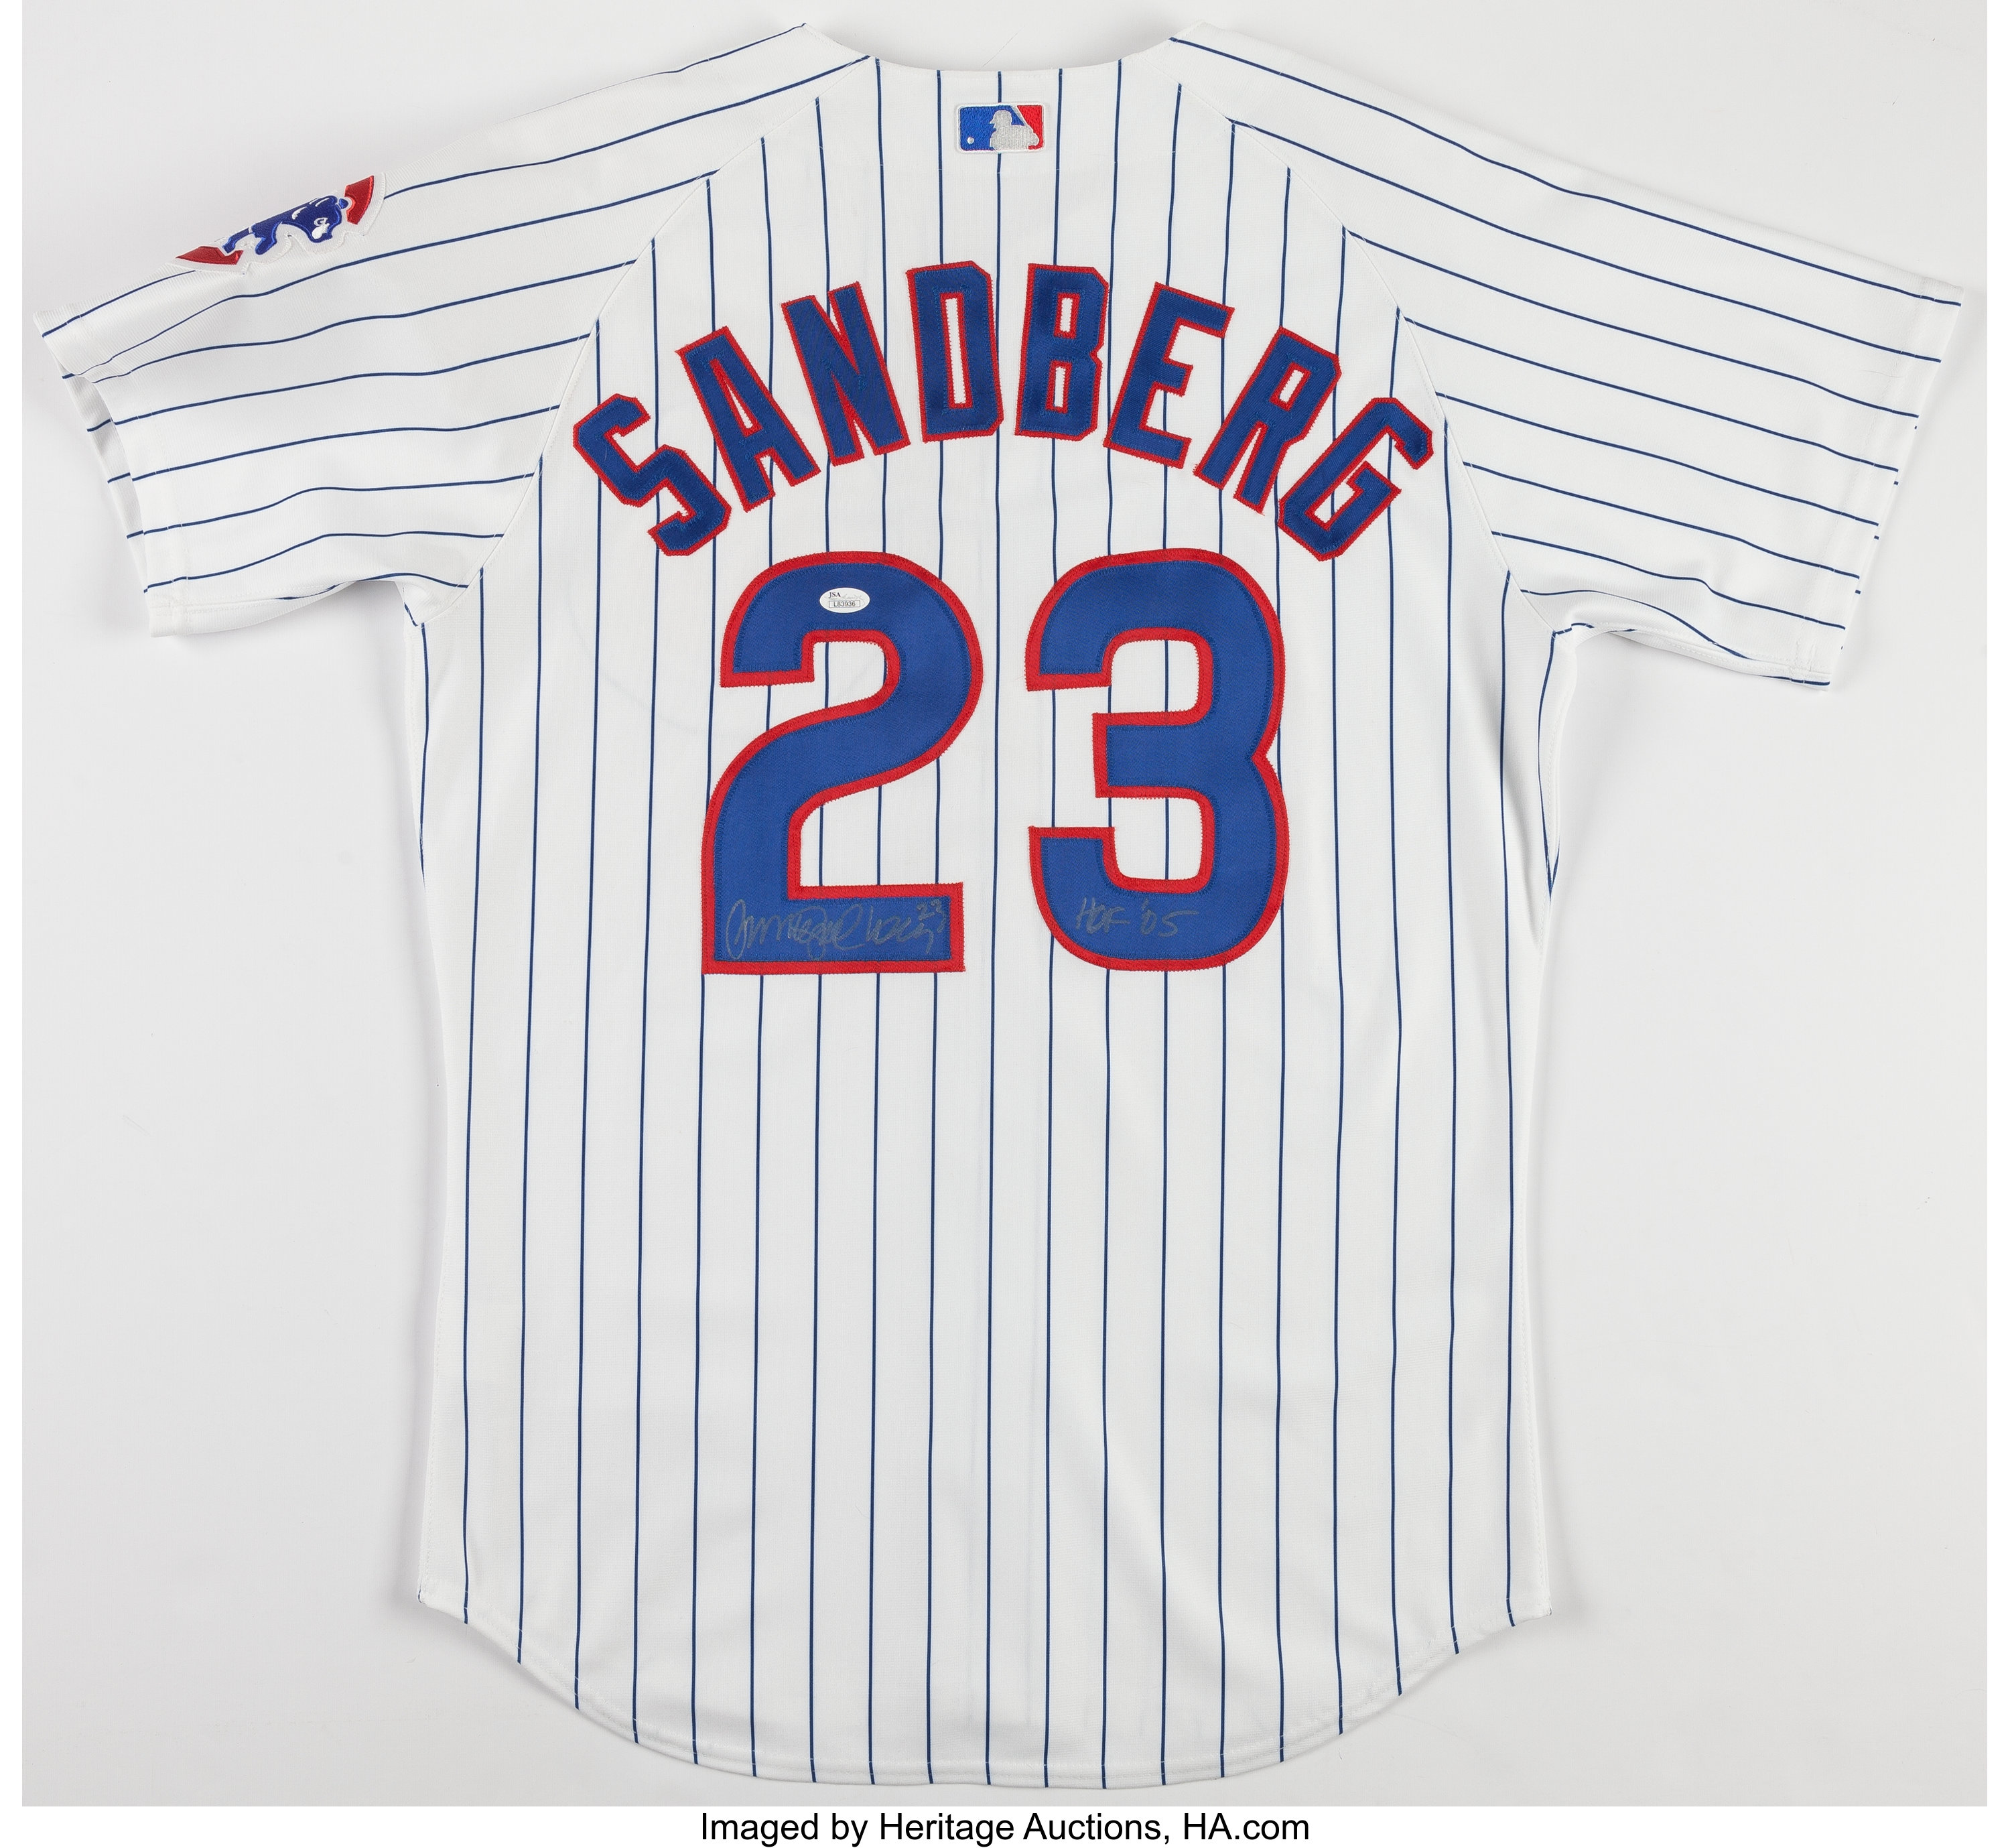 Ryne Sandberg Signed Chicago Cubs Jersey. Baseball Collectibles